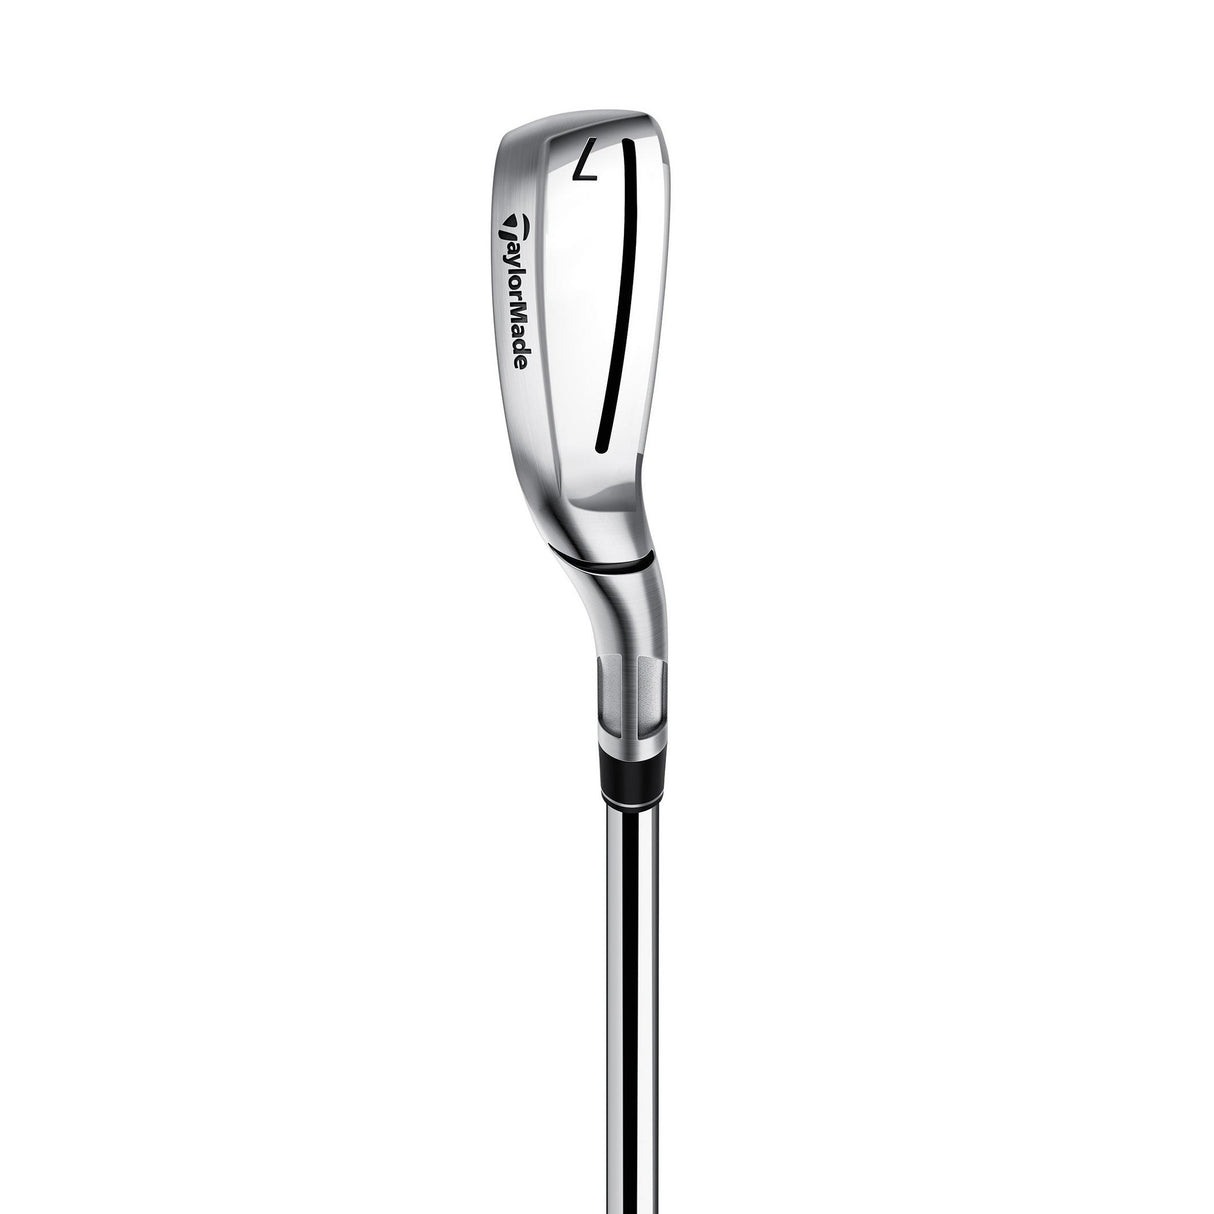 TaylorMade Stealth HD Iron Set with Steel Shafts - Niagara Golf Warehouse TAYLORMADE Iron Sets